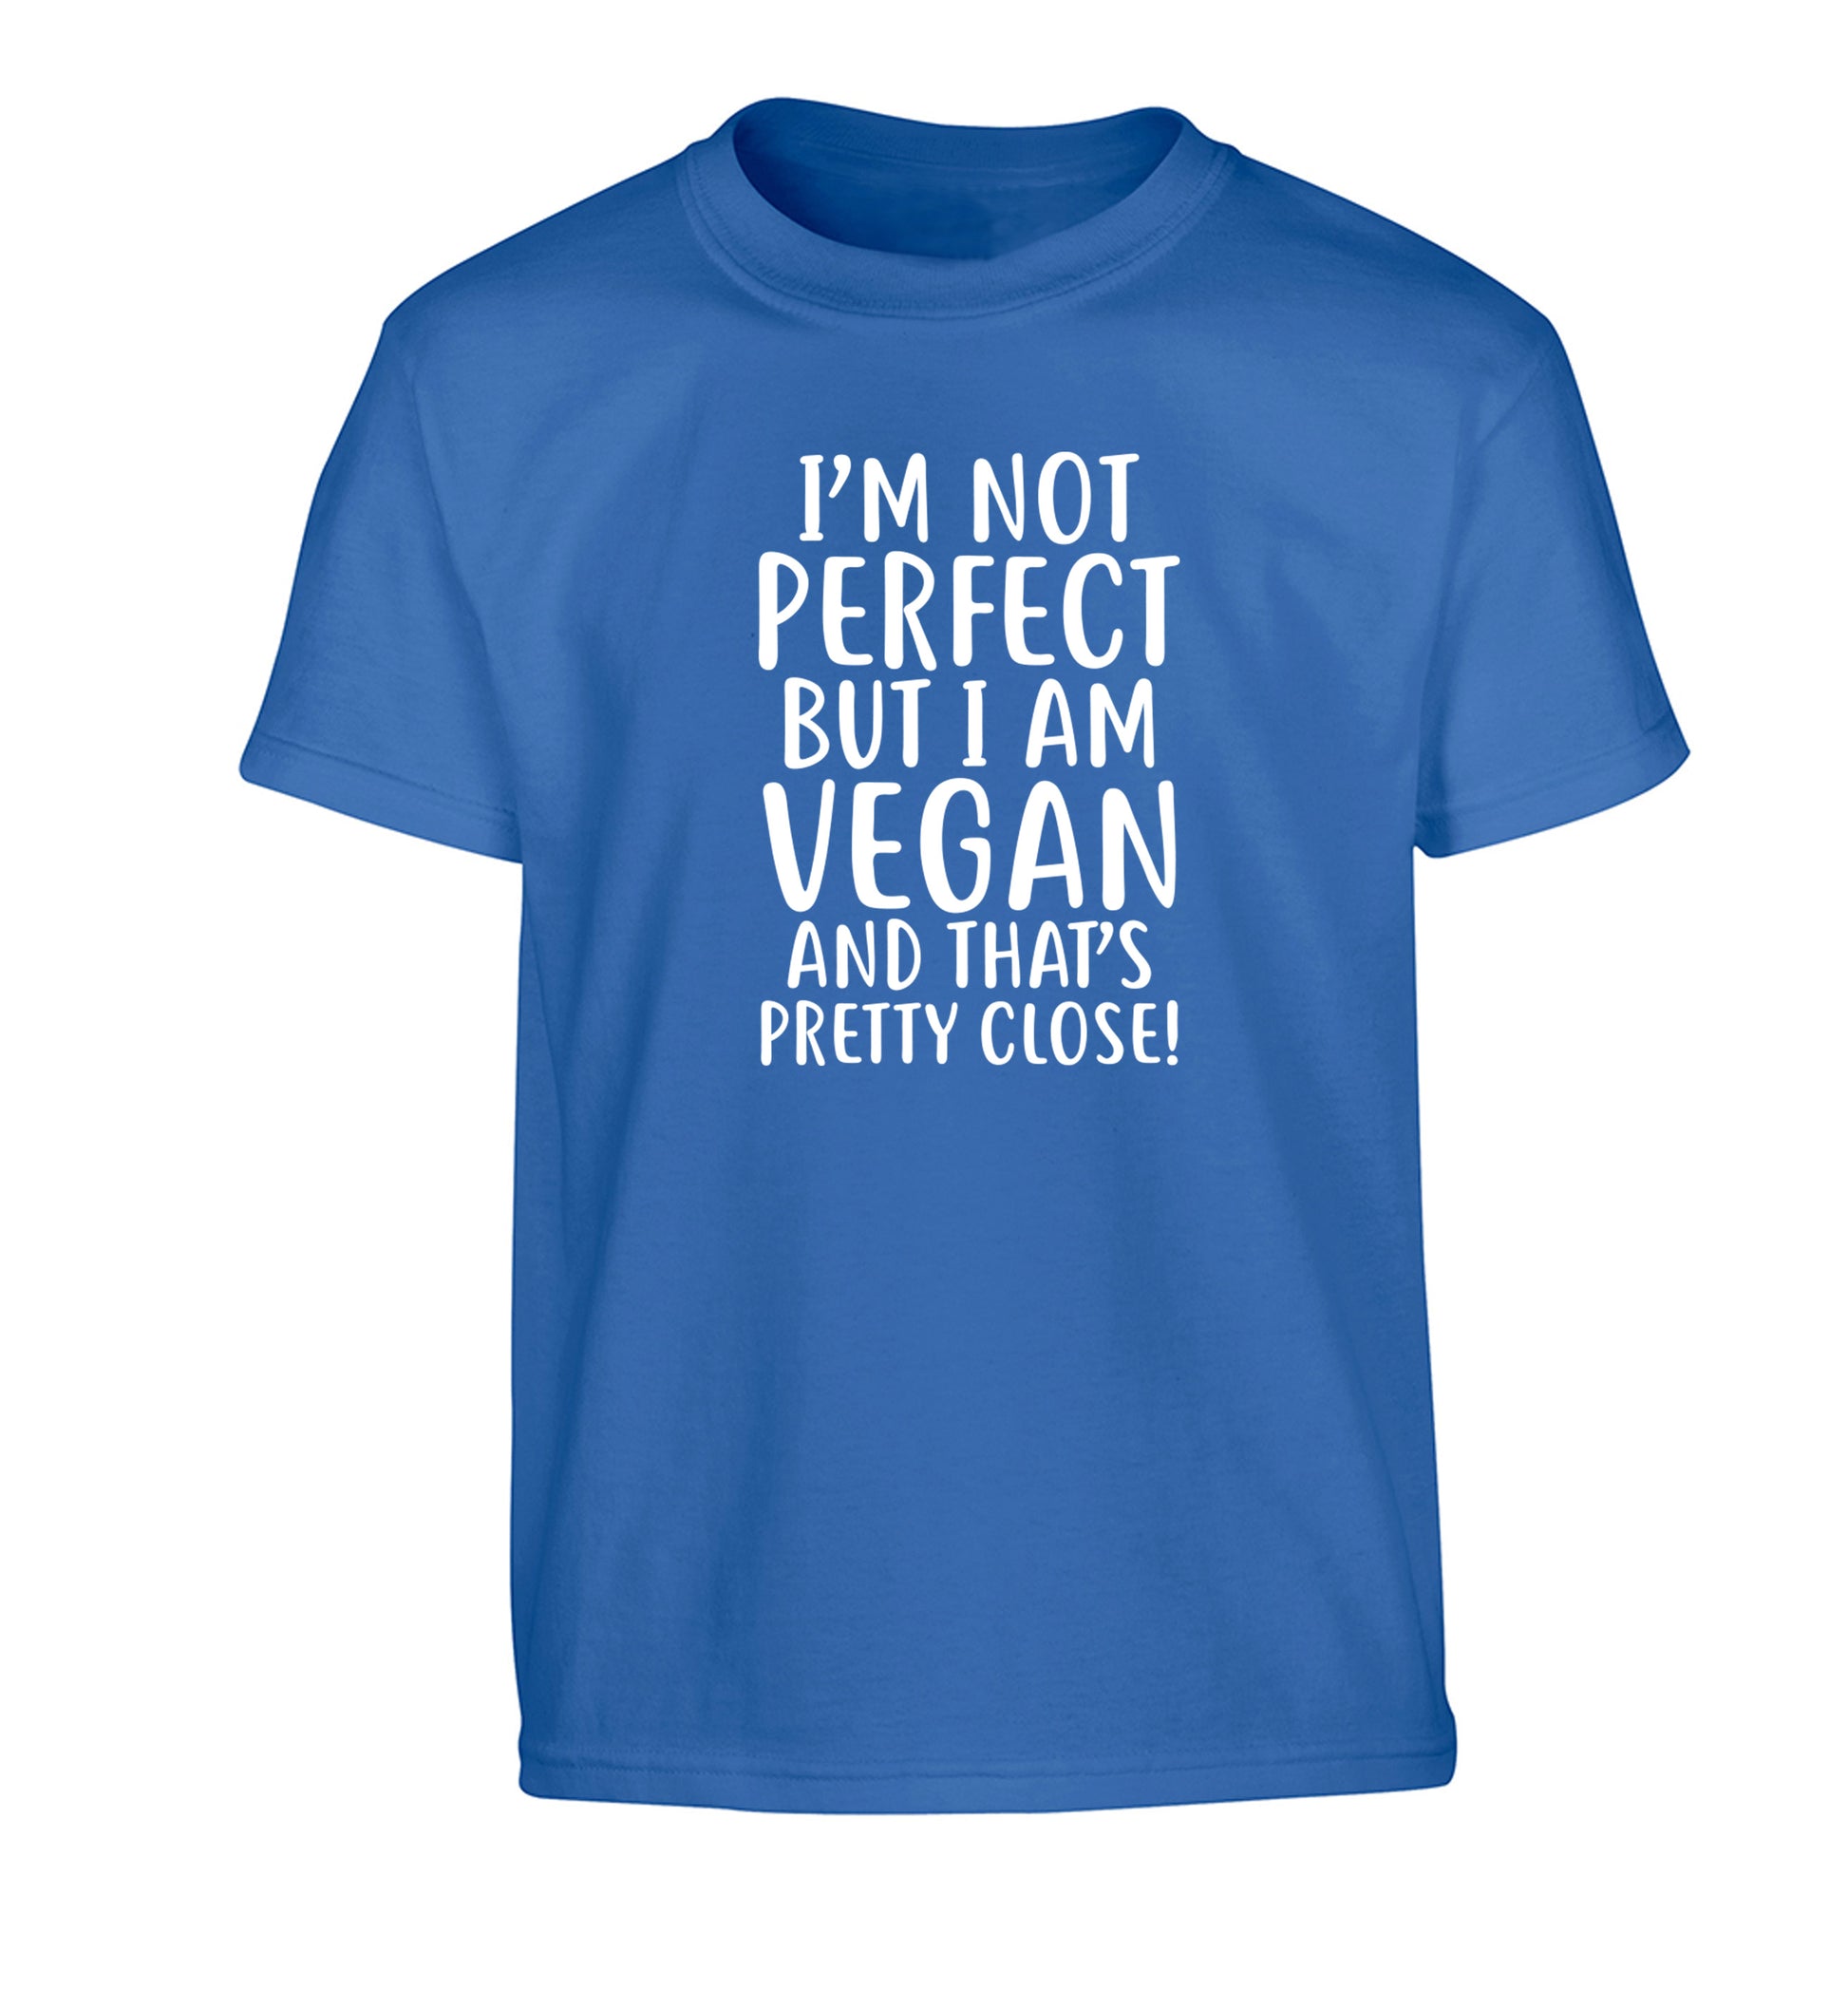 Might not be perfect but I am vegan Children's blue Tshirt 12-13 Years